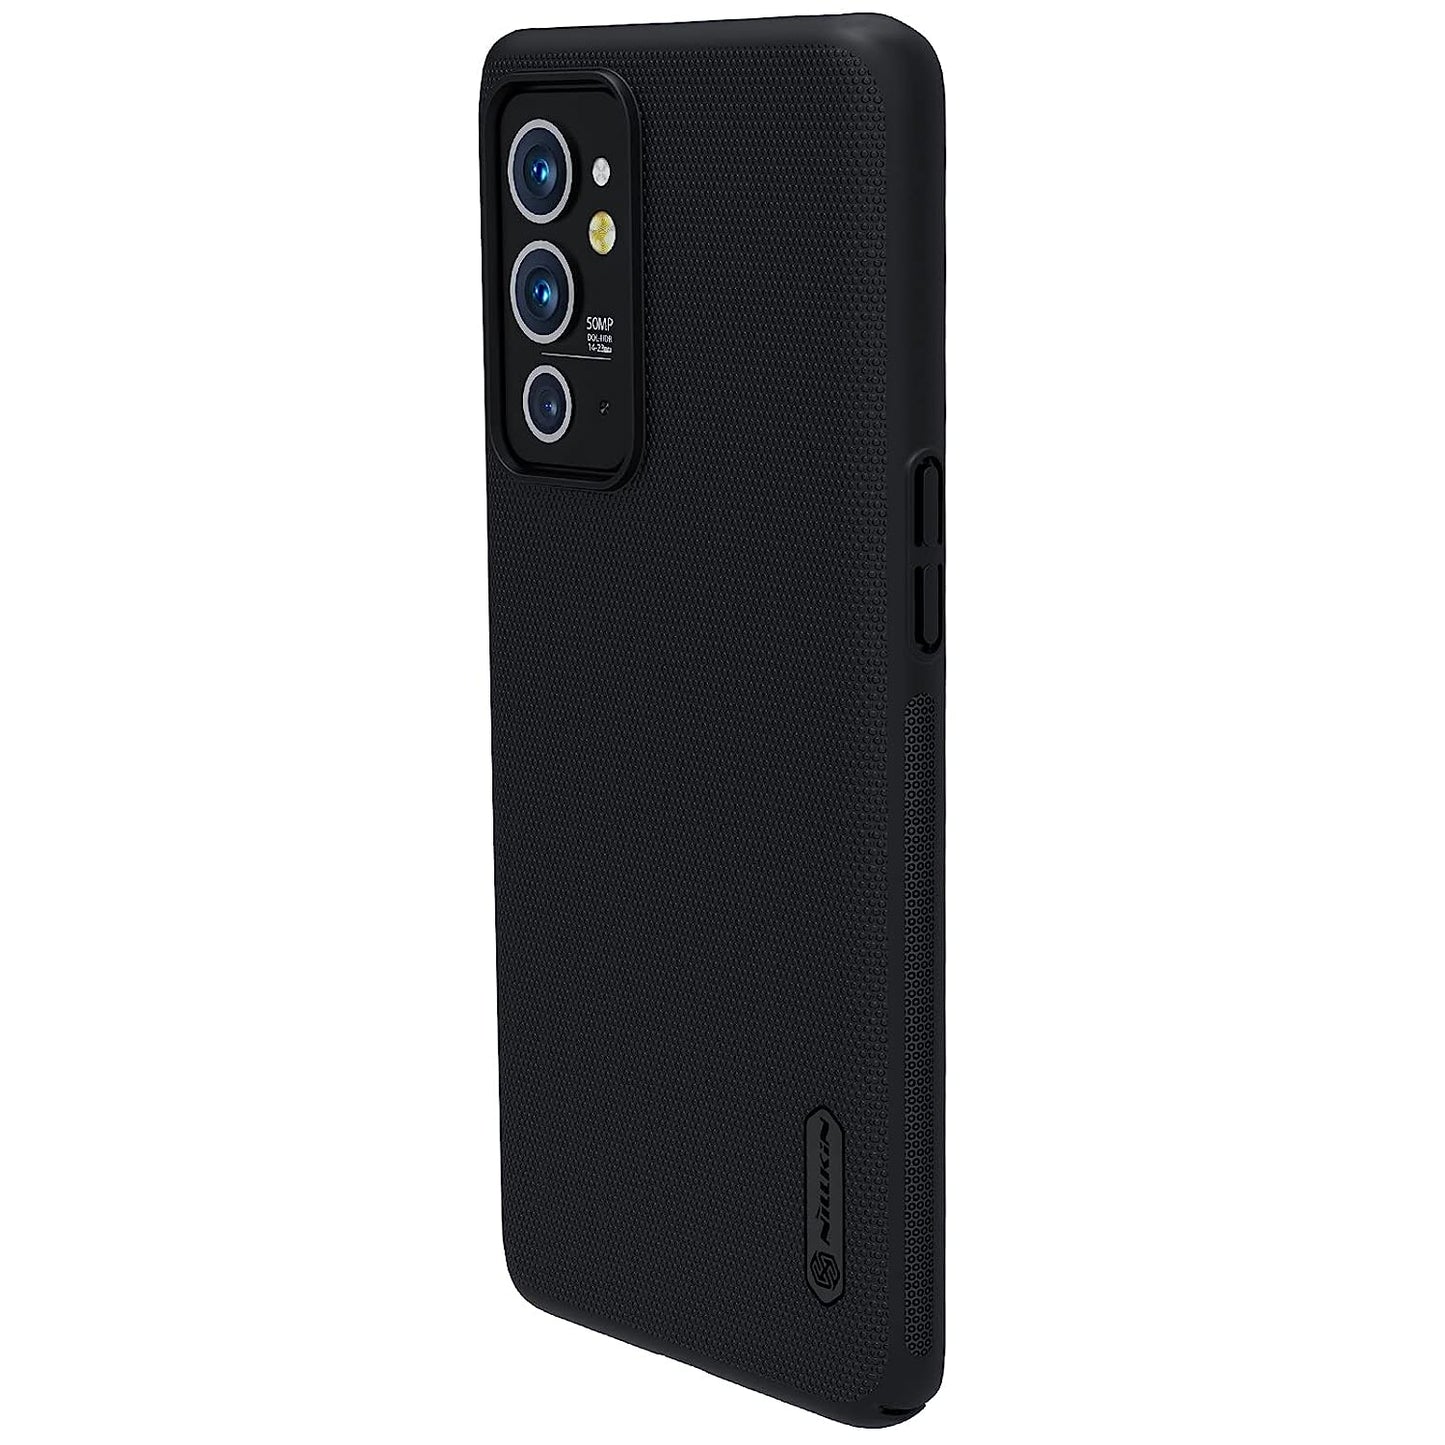 Nillkin Poly Carbonate Super Frosted PC Hard Back Cover for One Plus 9RT OnePlus 9 RT 1+9 RT 6.62" inches (Black)